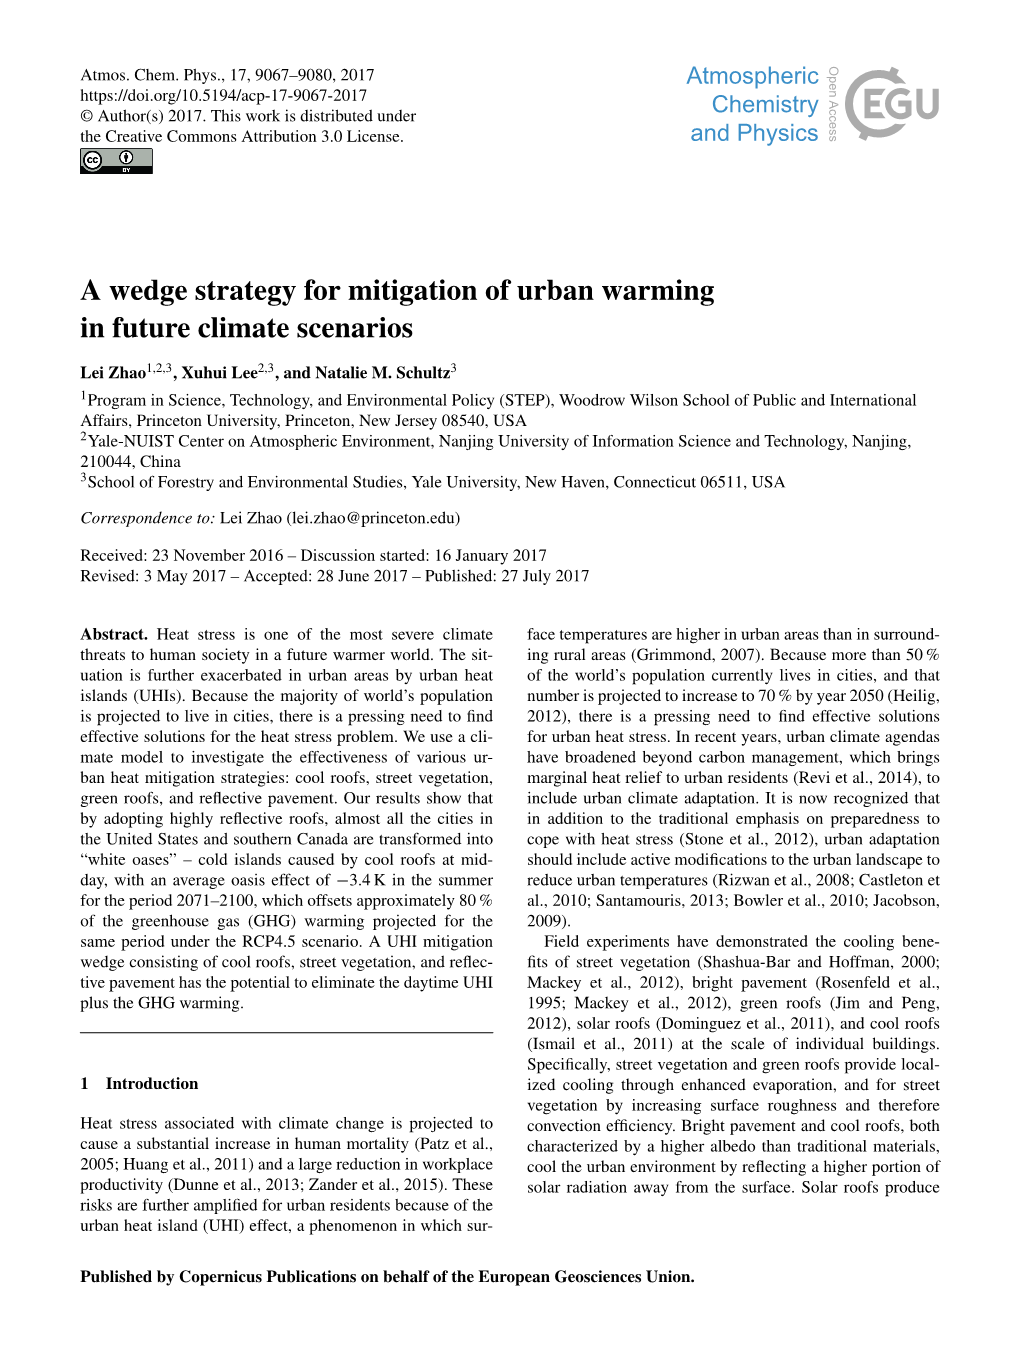 A Wedge Strategy for Mitigation of Urban Warming in Future Climate Scenarios